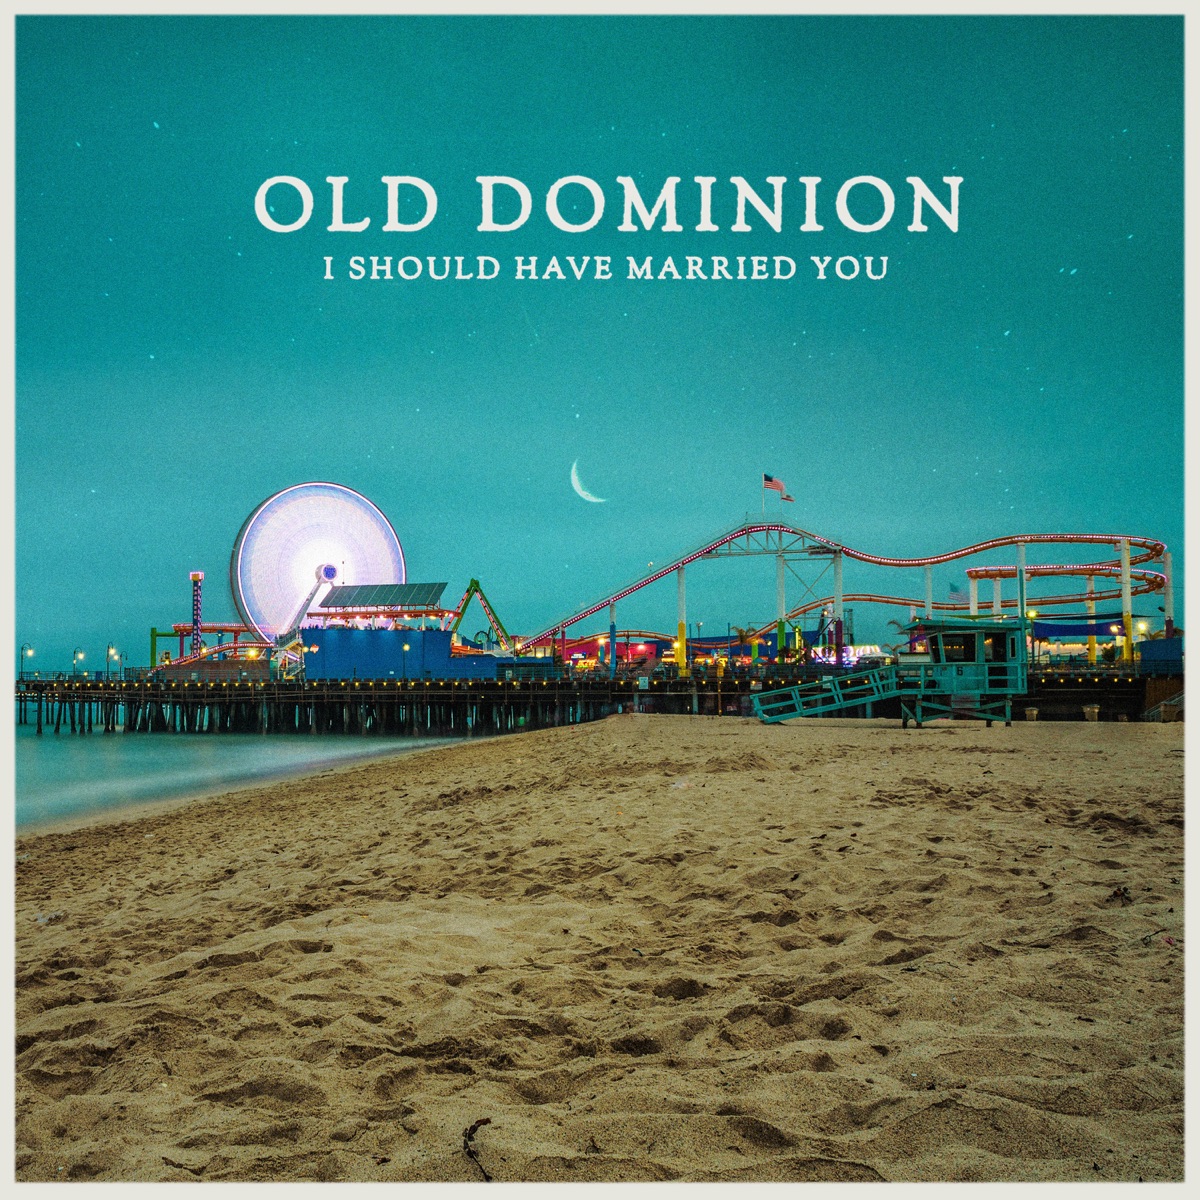 Old Dominion I Should Have Married You (Audio, Lyrics) » MPmania